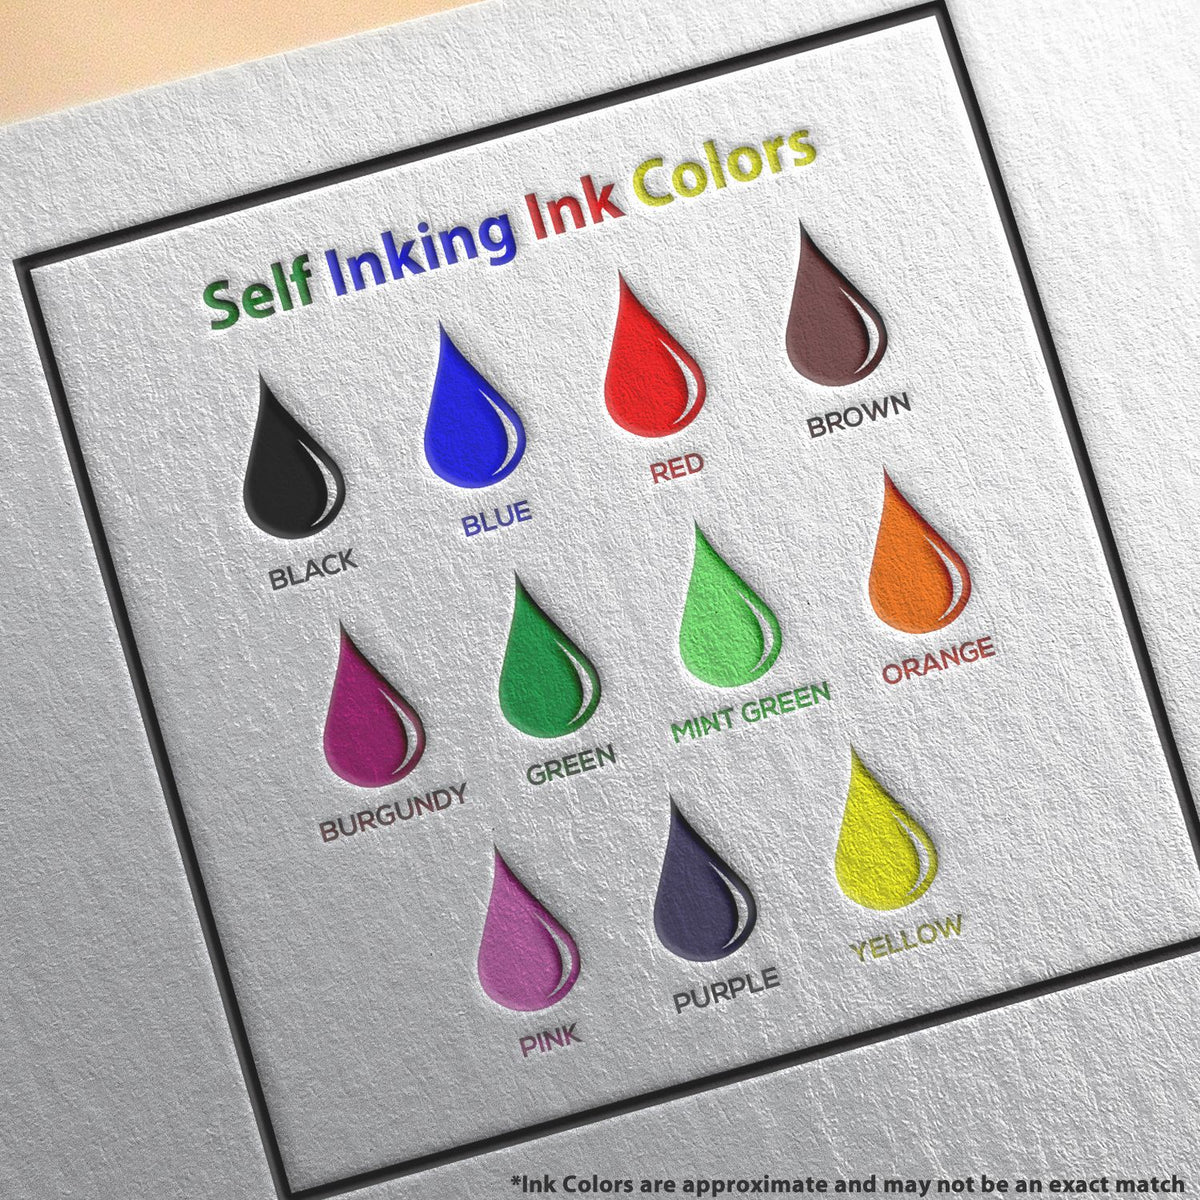 A picture showing the different ink colors or hues available for the Self-Inking North Carolina Geologist Stamp